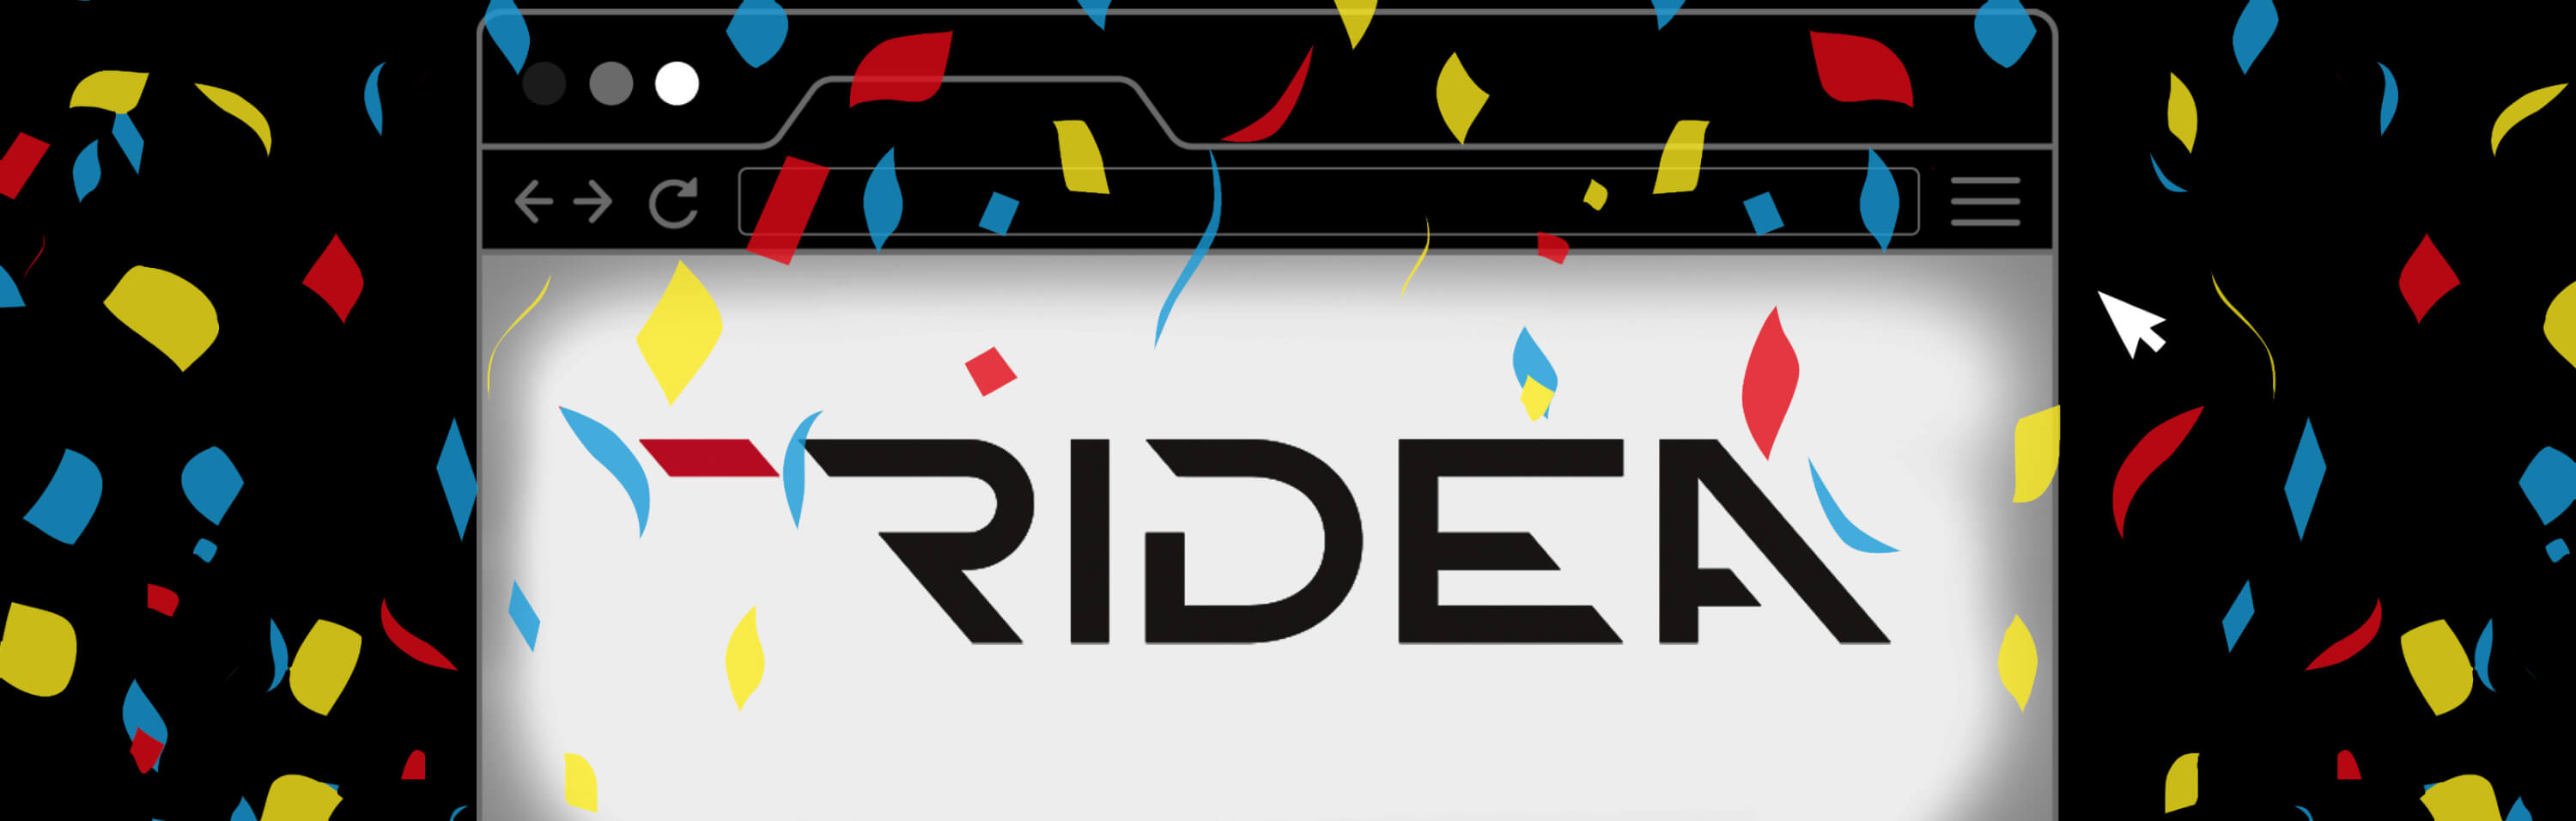 Welcome to Ridea's new website